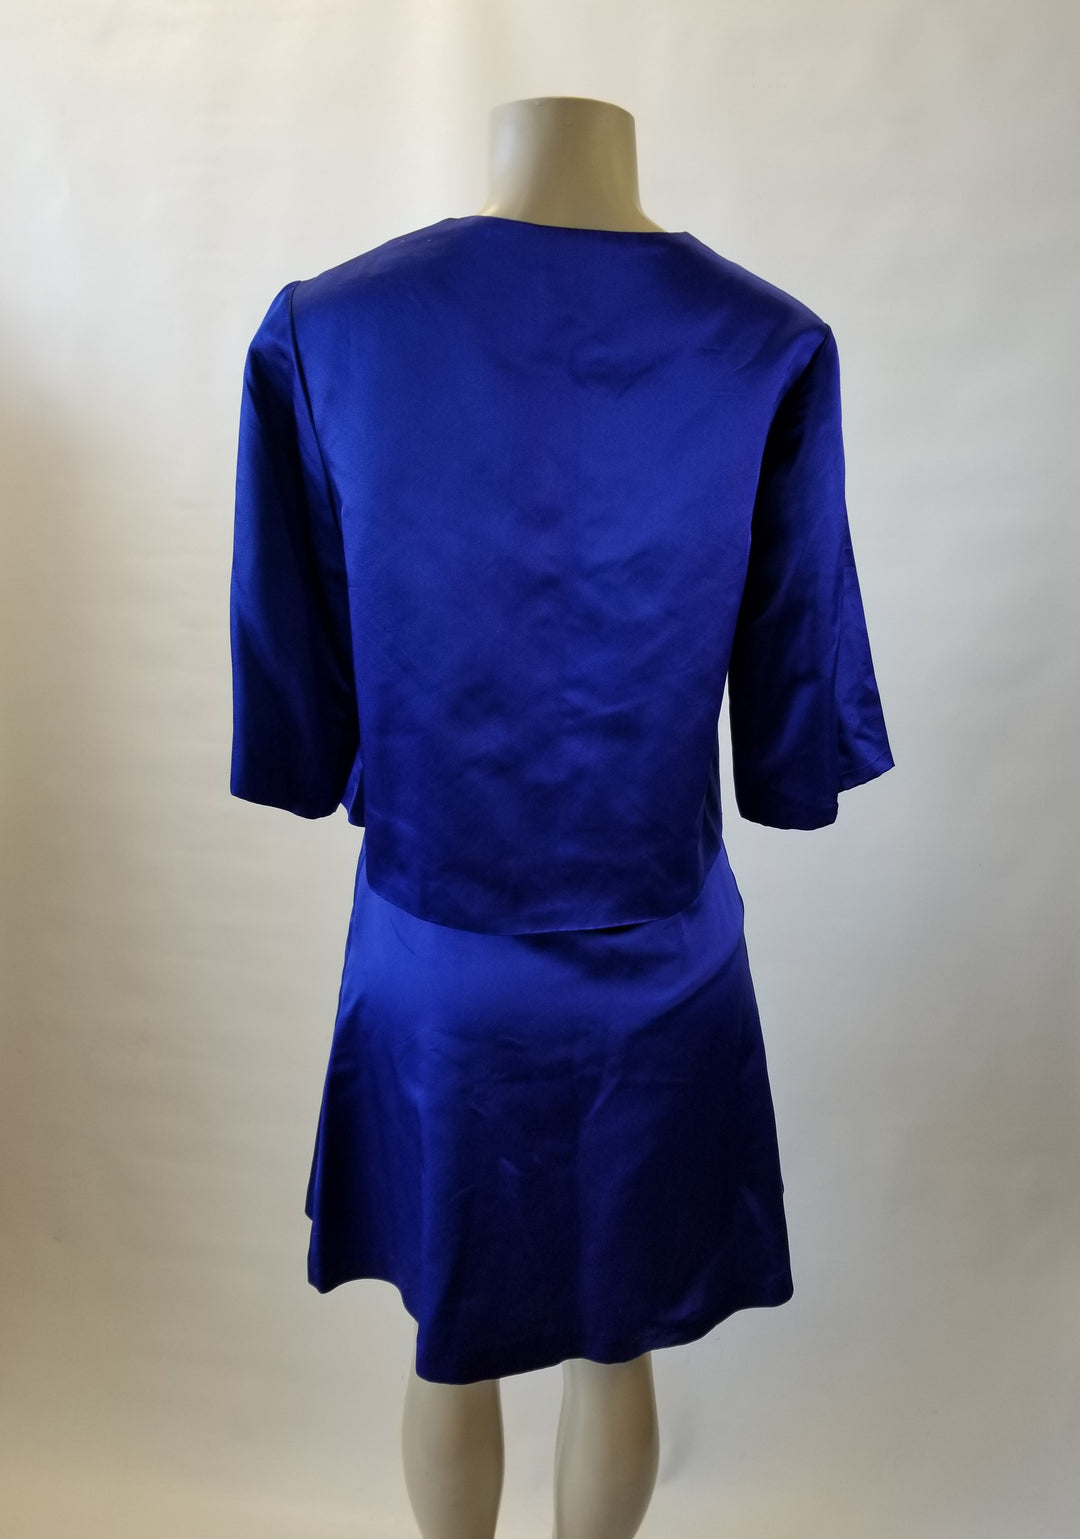 Laura Delman Pleated Blue Skirt - Size 4 - Donated From The Designer - The Fashion Foundation